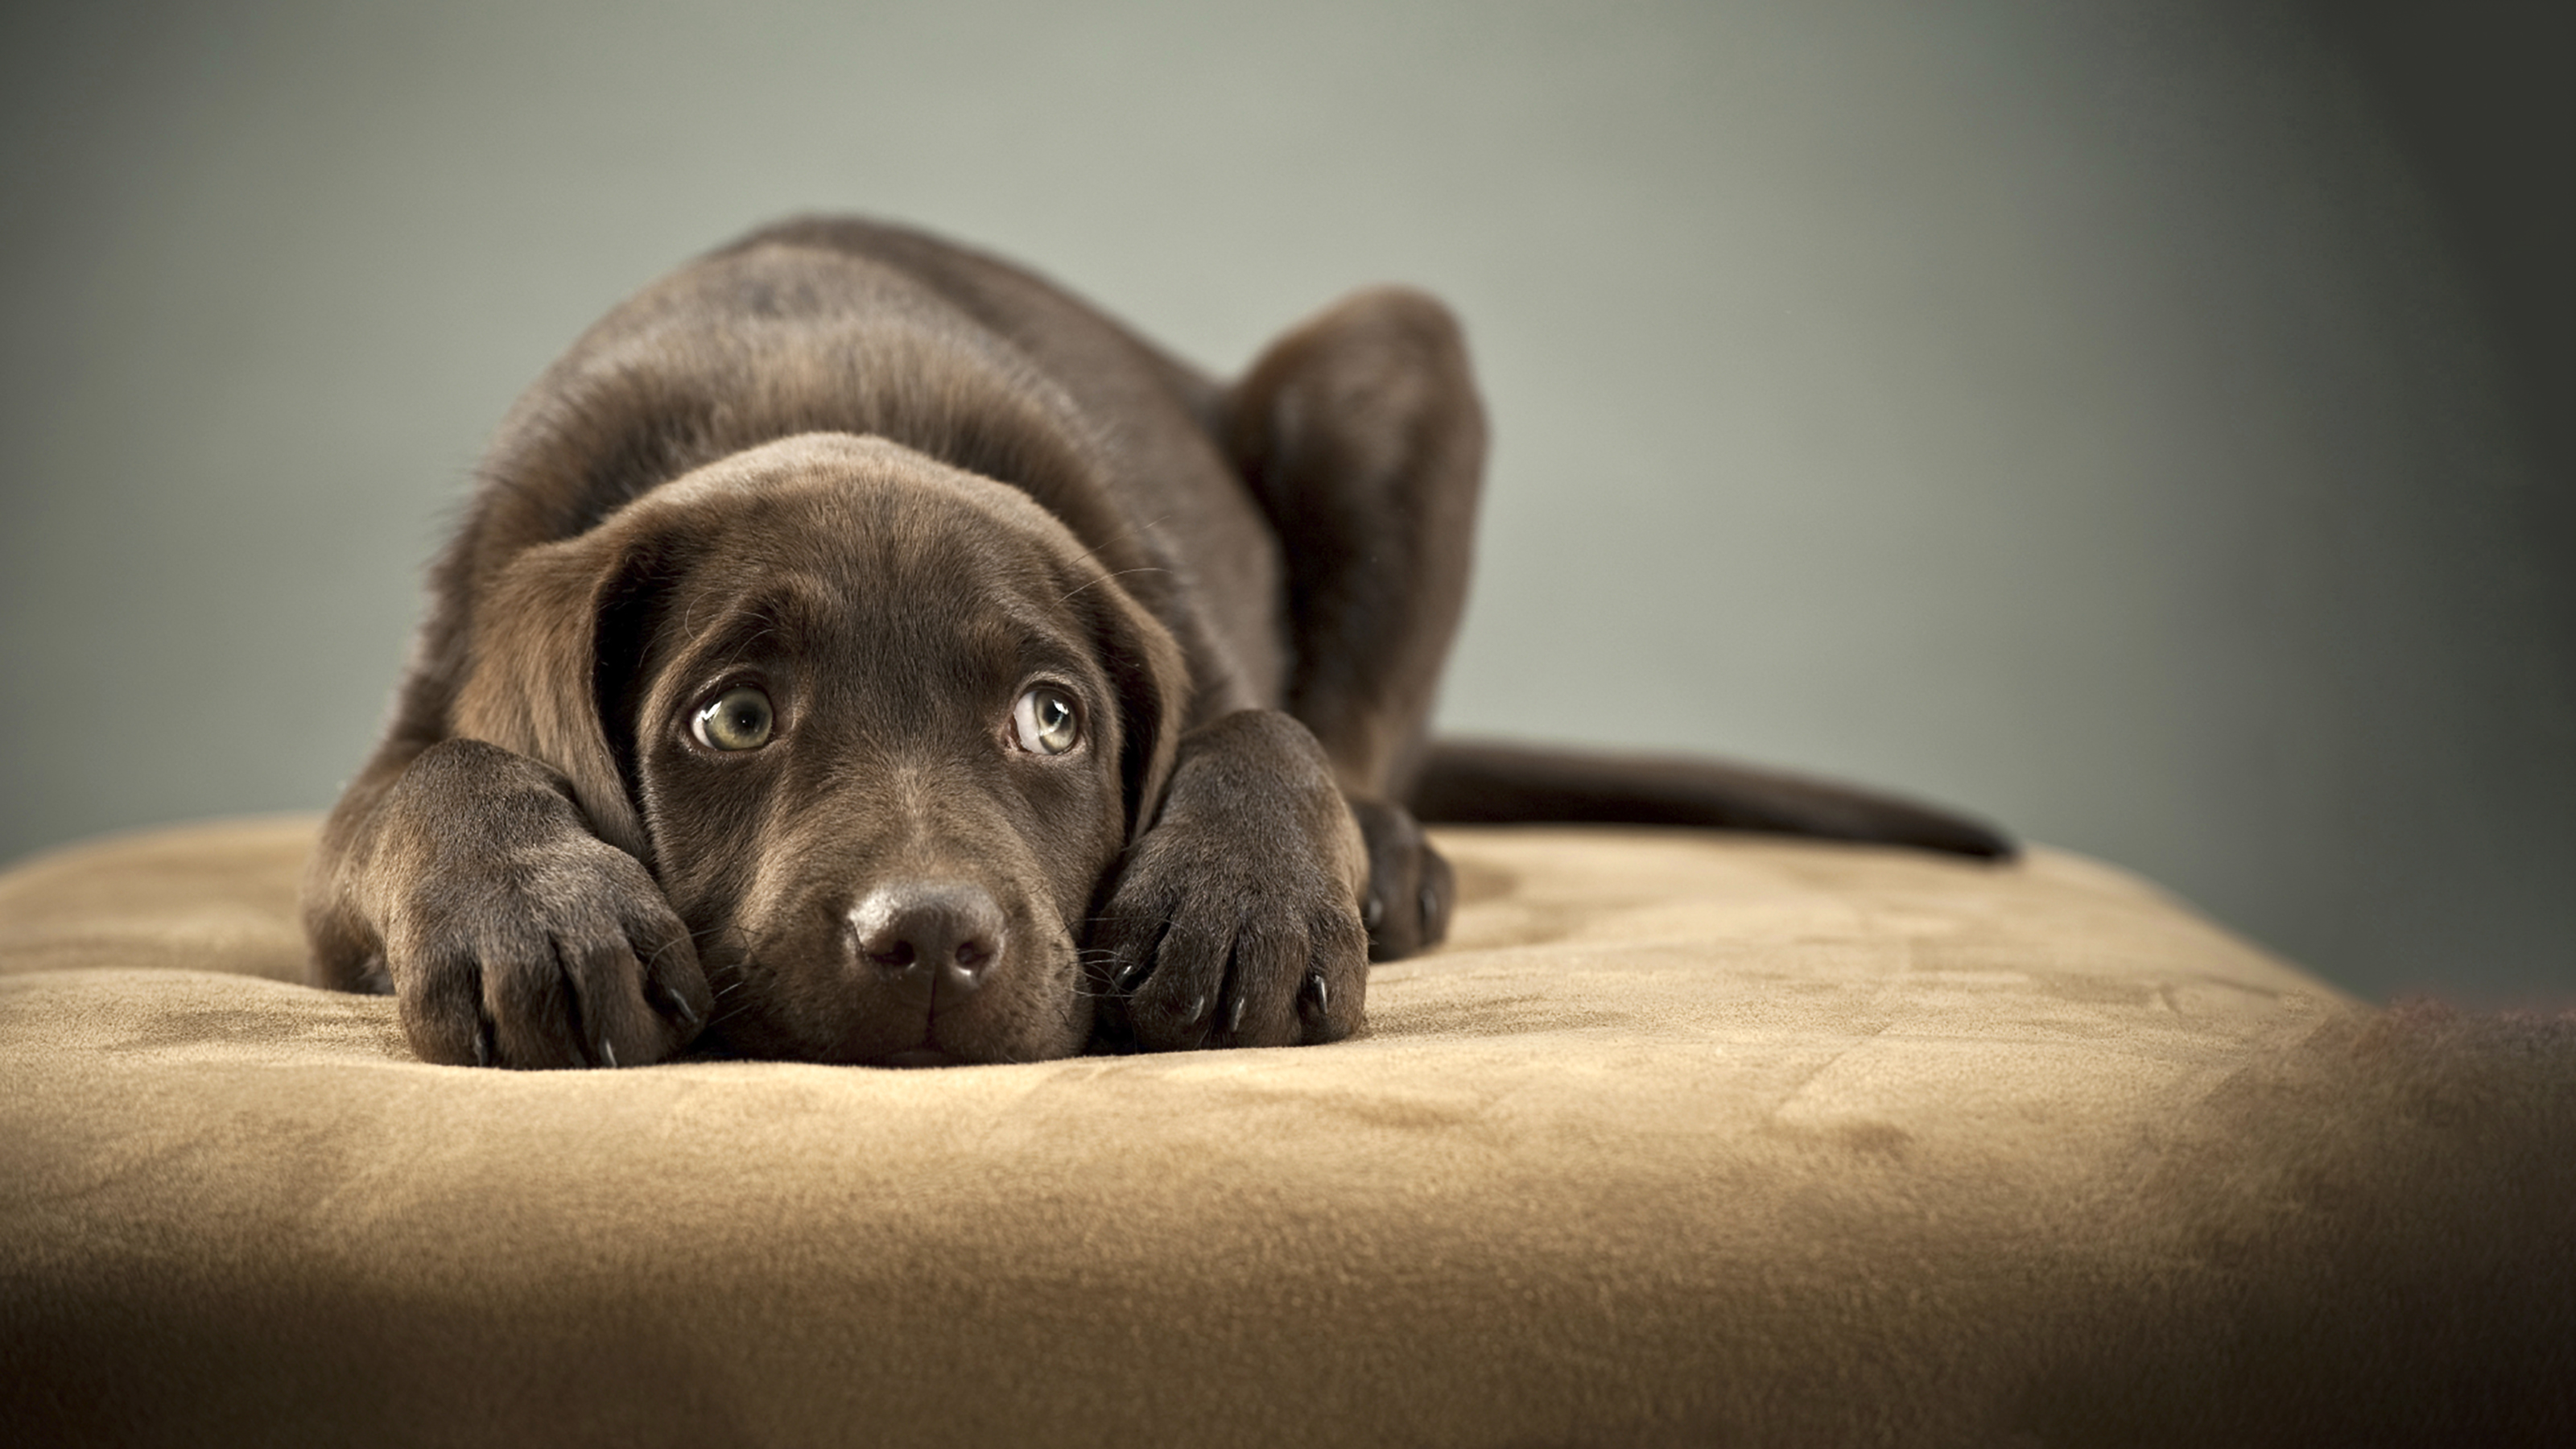 Expert Tips to Solve Separation Anxiety in Dogs 